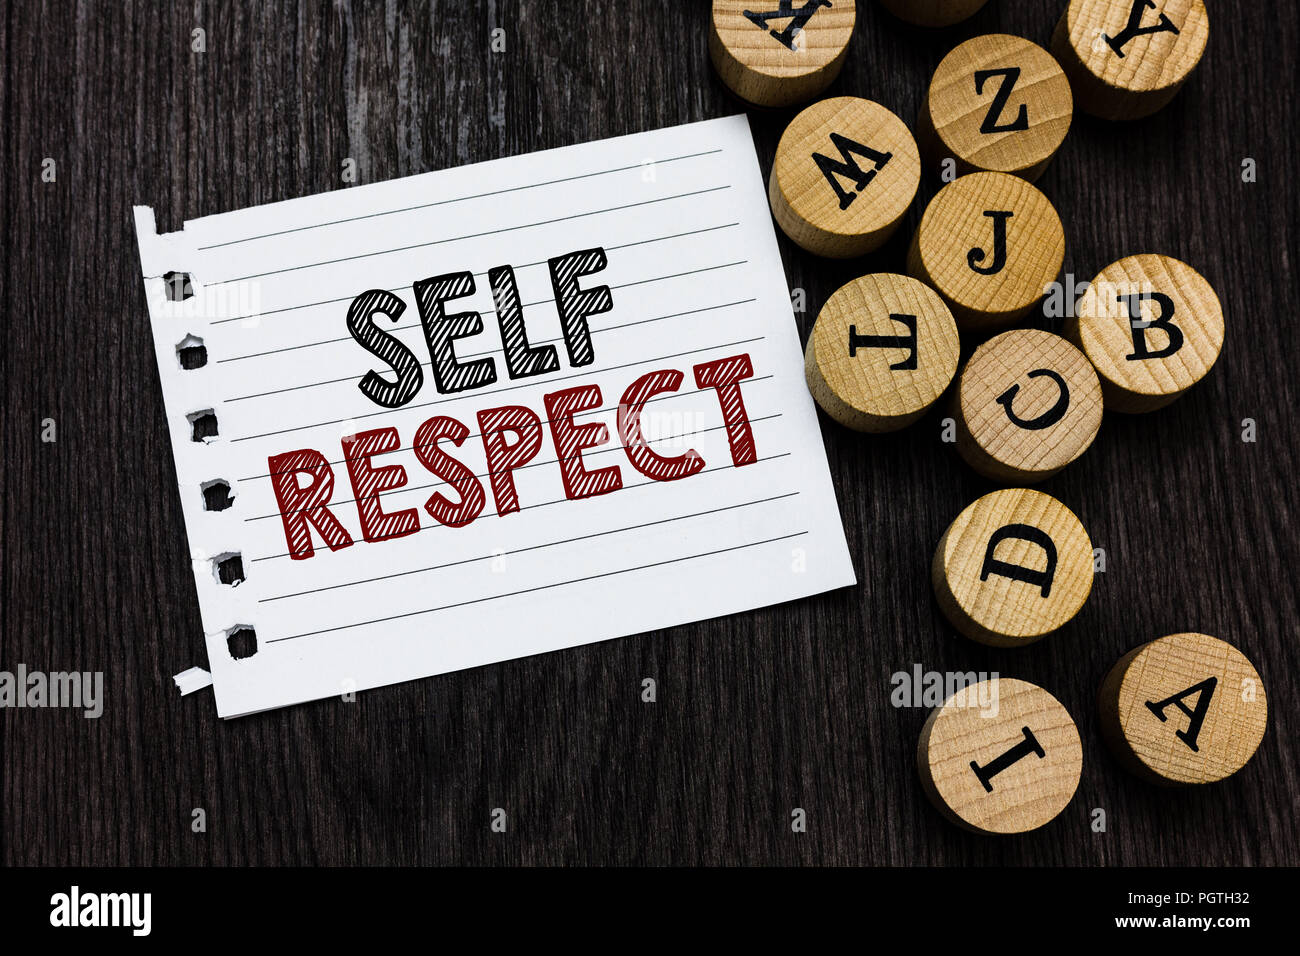 Word writing text Self Respect. Business concept for Pride and ...